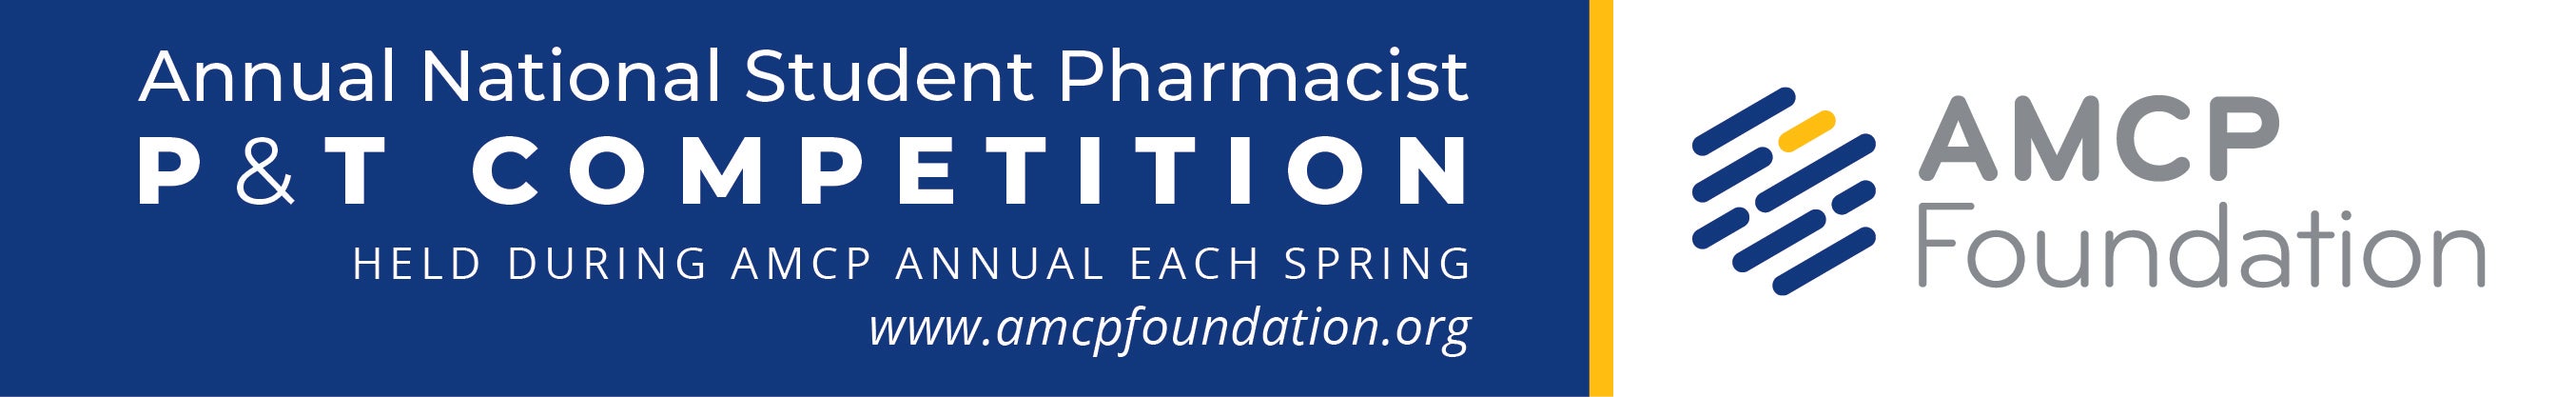 Annual National Student Pharmacy P &T Competition Banner and AMCP Foundation Logo